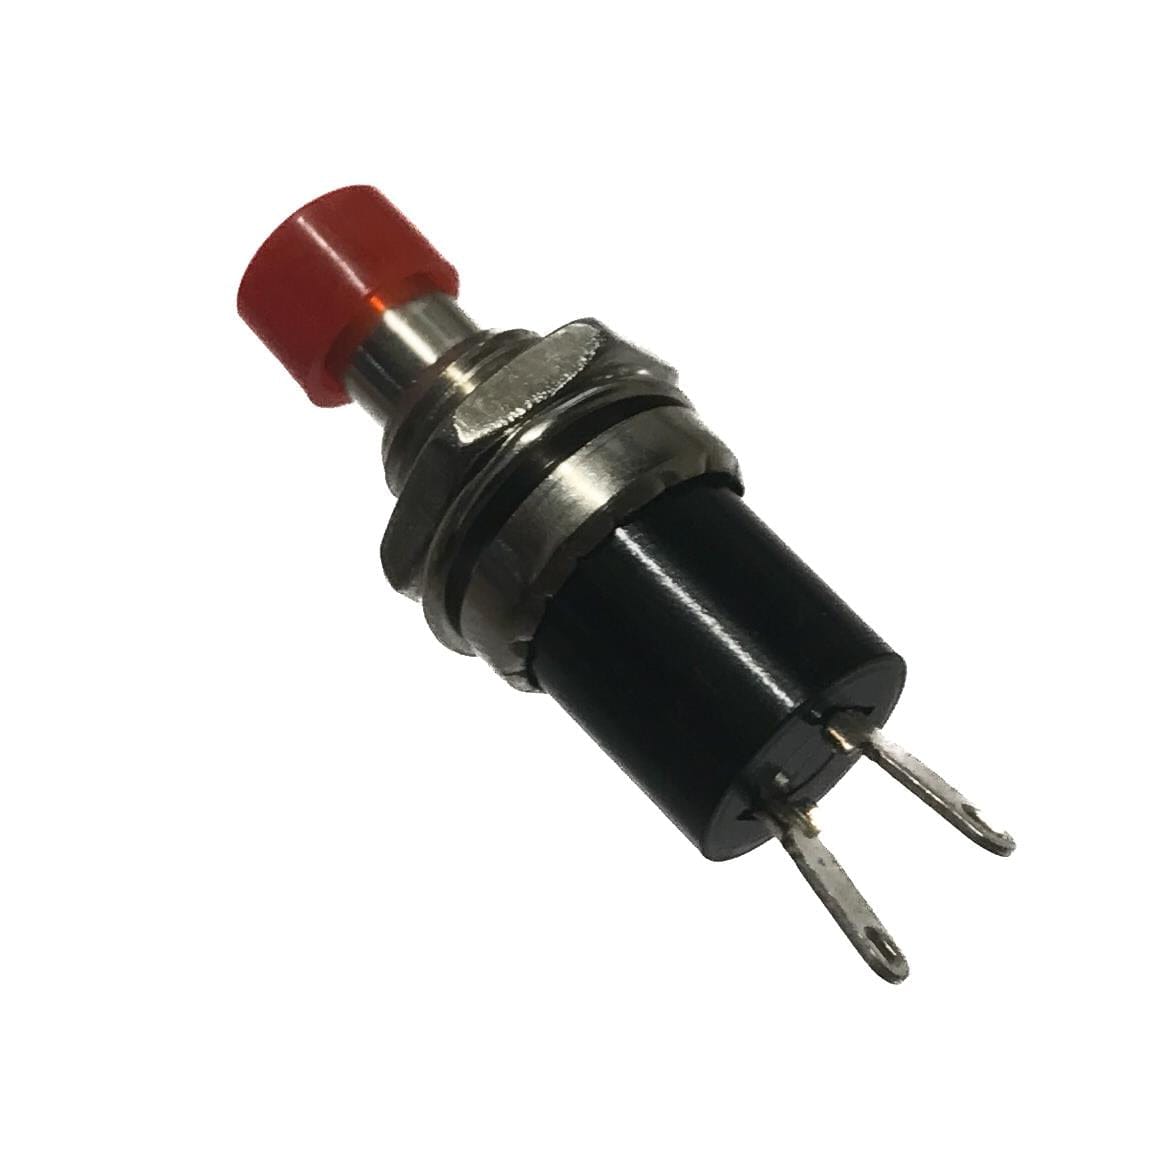 Red Off-On Miniature Push to Make Switch - SPST 1A 250VAC Service Item Unbranded 902590